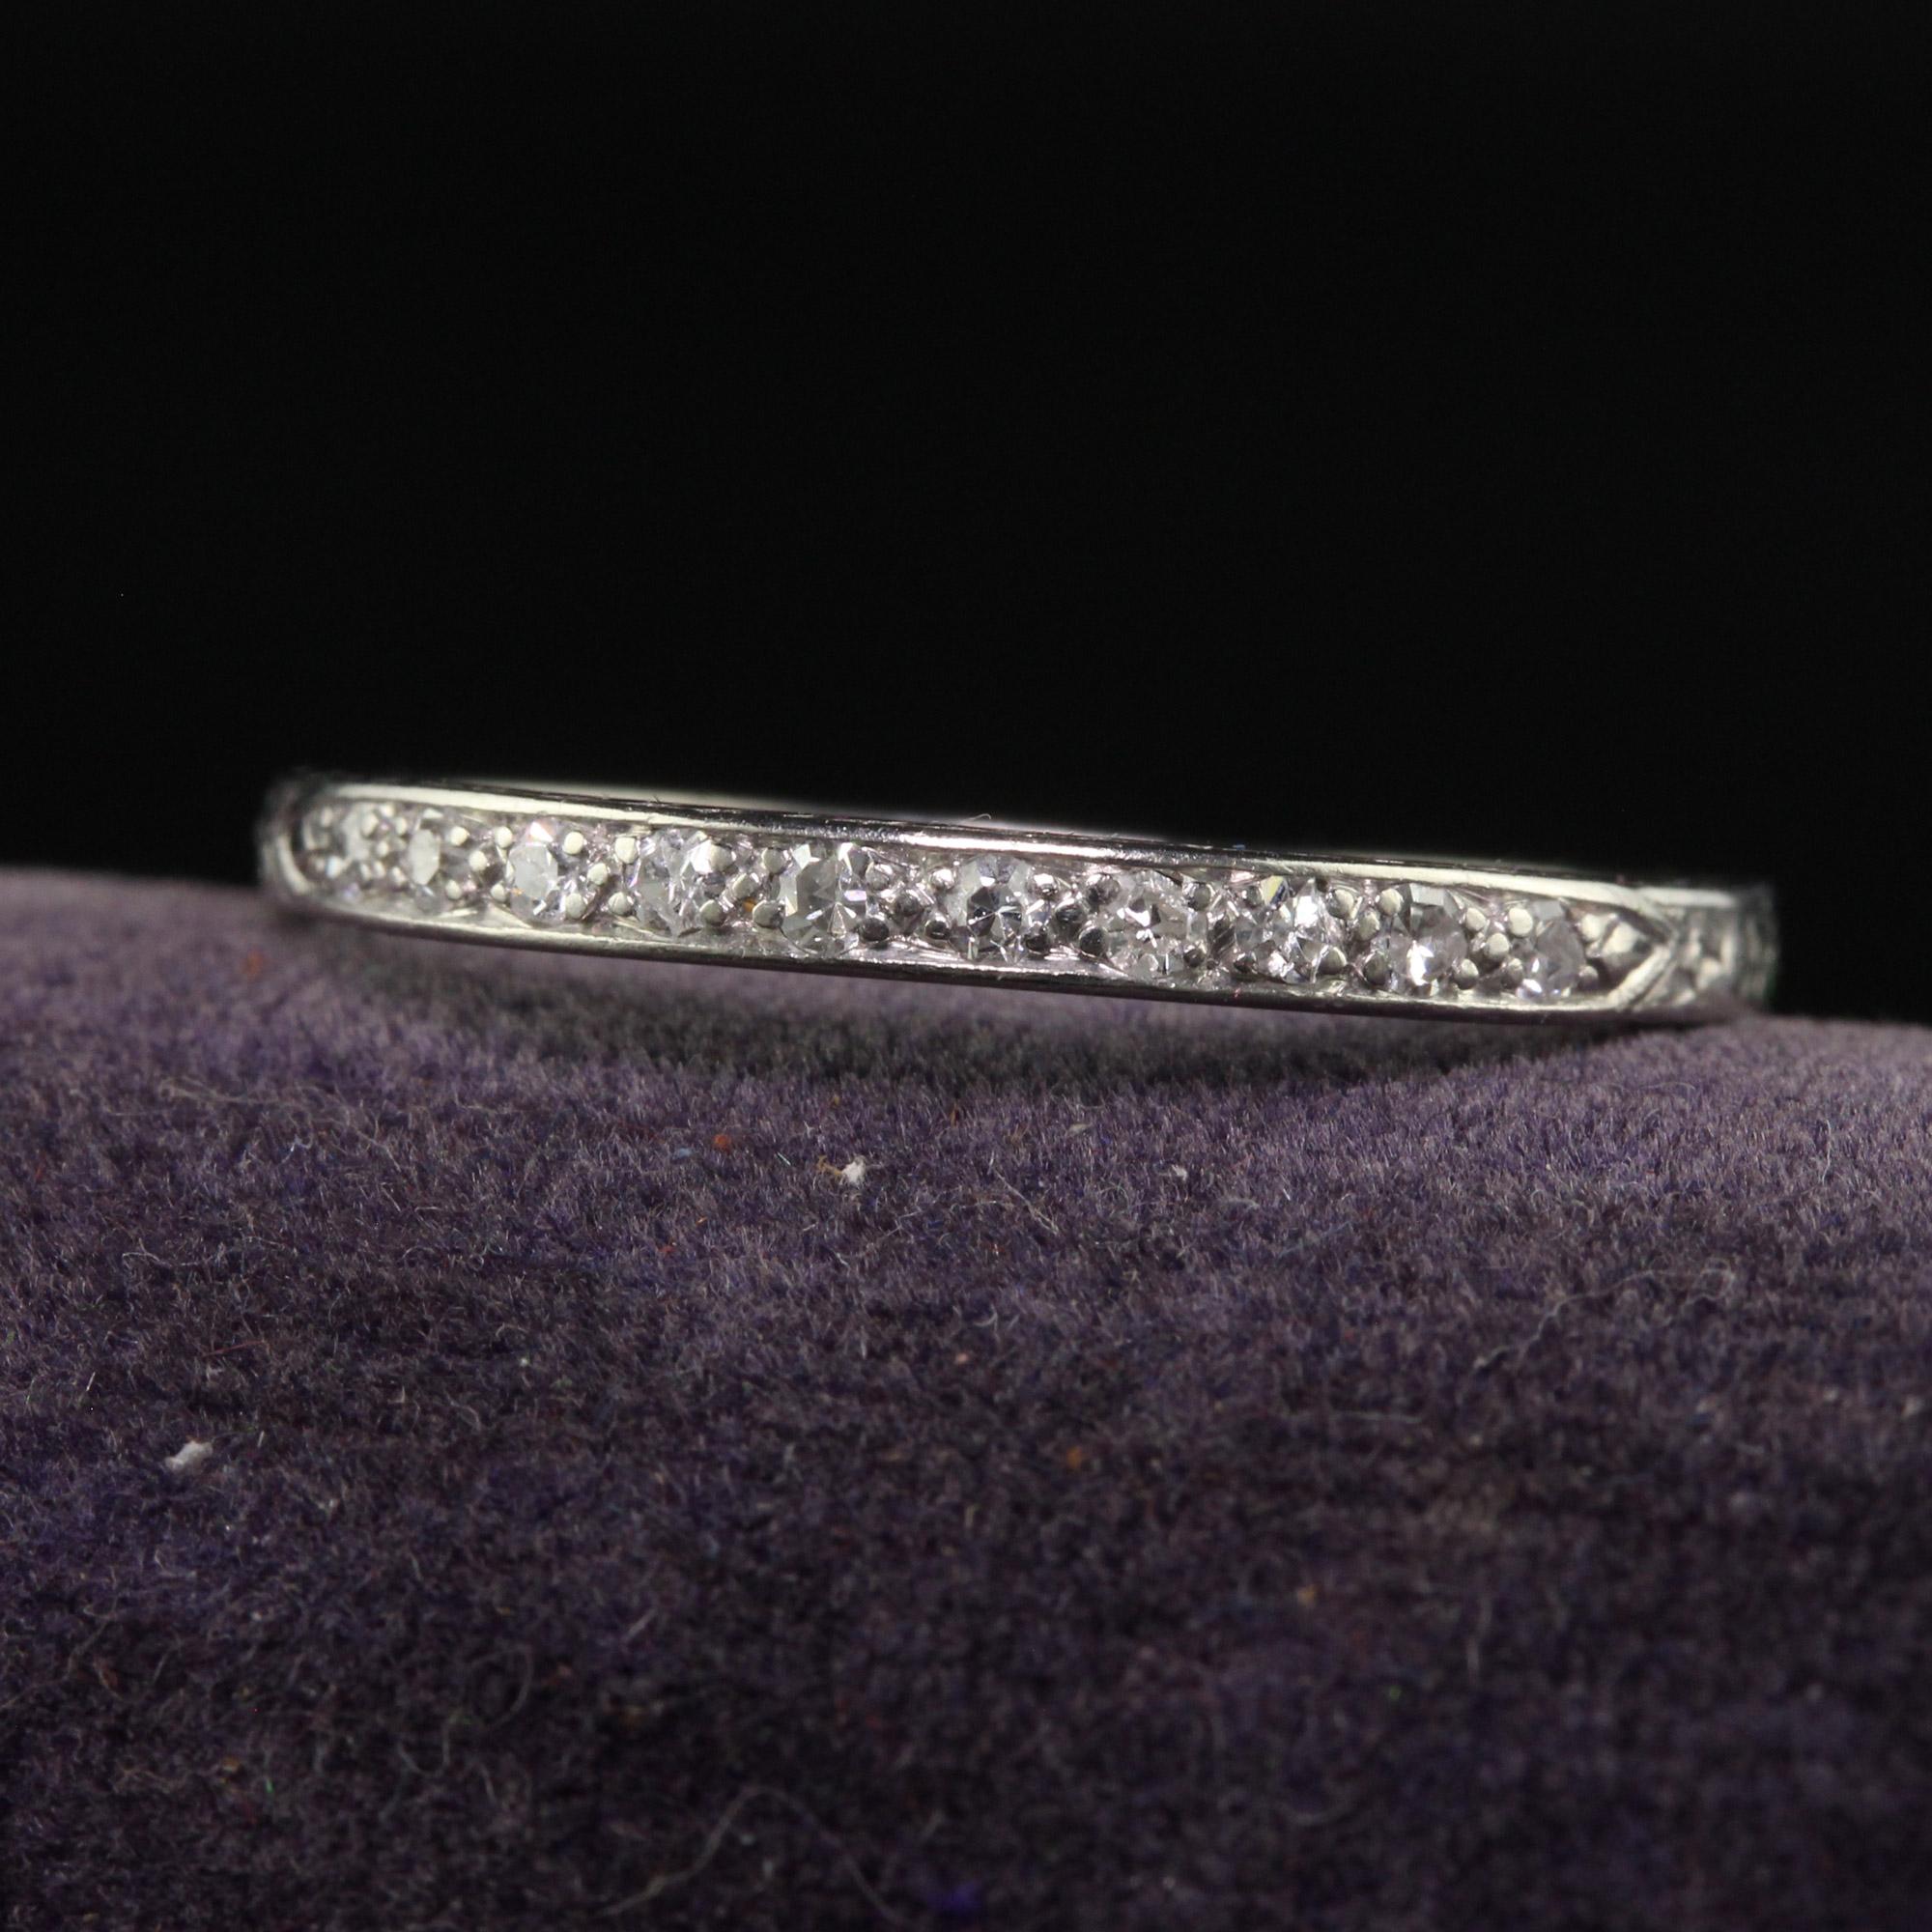 Beautiful Antique Art Deco Platinum Single Cut Diamond Engraved Wedding Band - Size 8 1/4. This gorgeous and classic wedding band is crafted in platinum. The top of the ring has white single cut diamonds set half way across the top. All sides of the